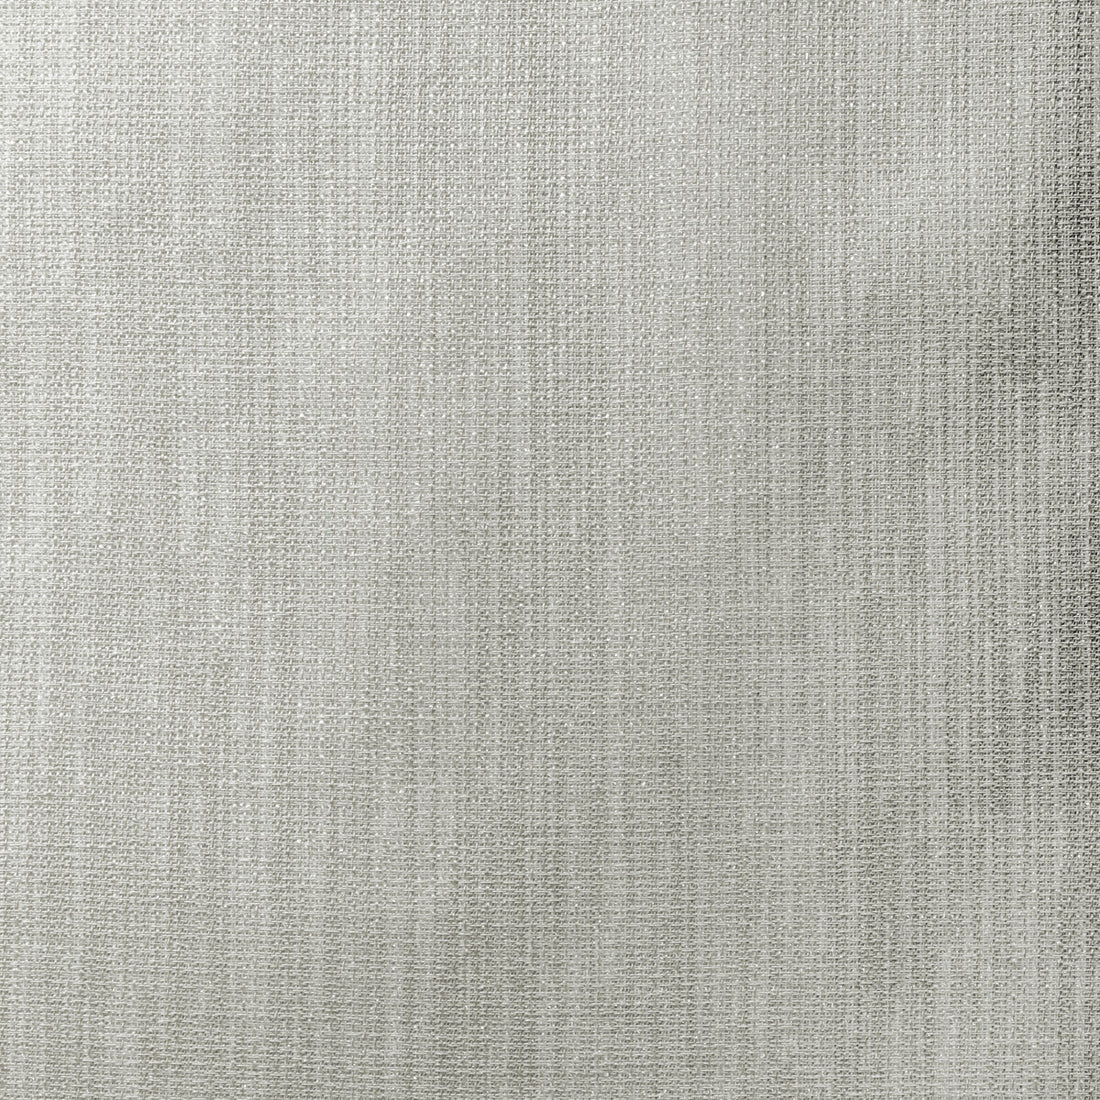 Kravet Contract fabric in 4521-11 color - pattern 4521.11.0 - by Kravet Contract in the Sheer Outlook collection